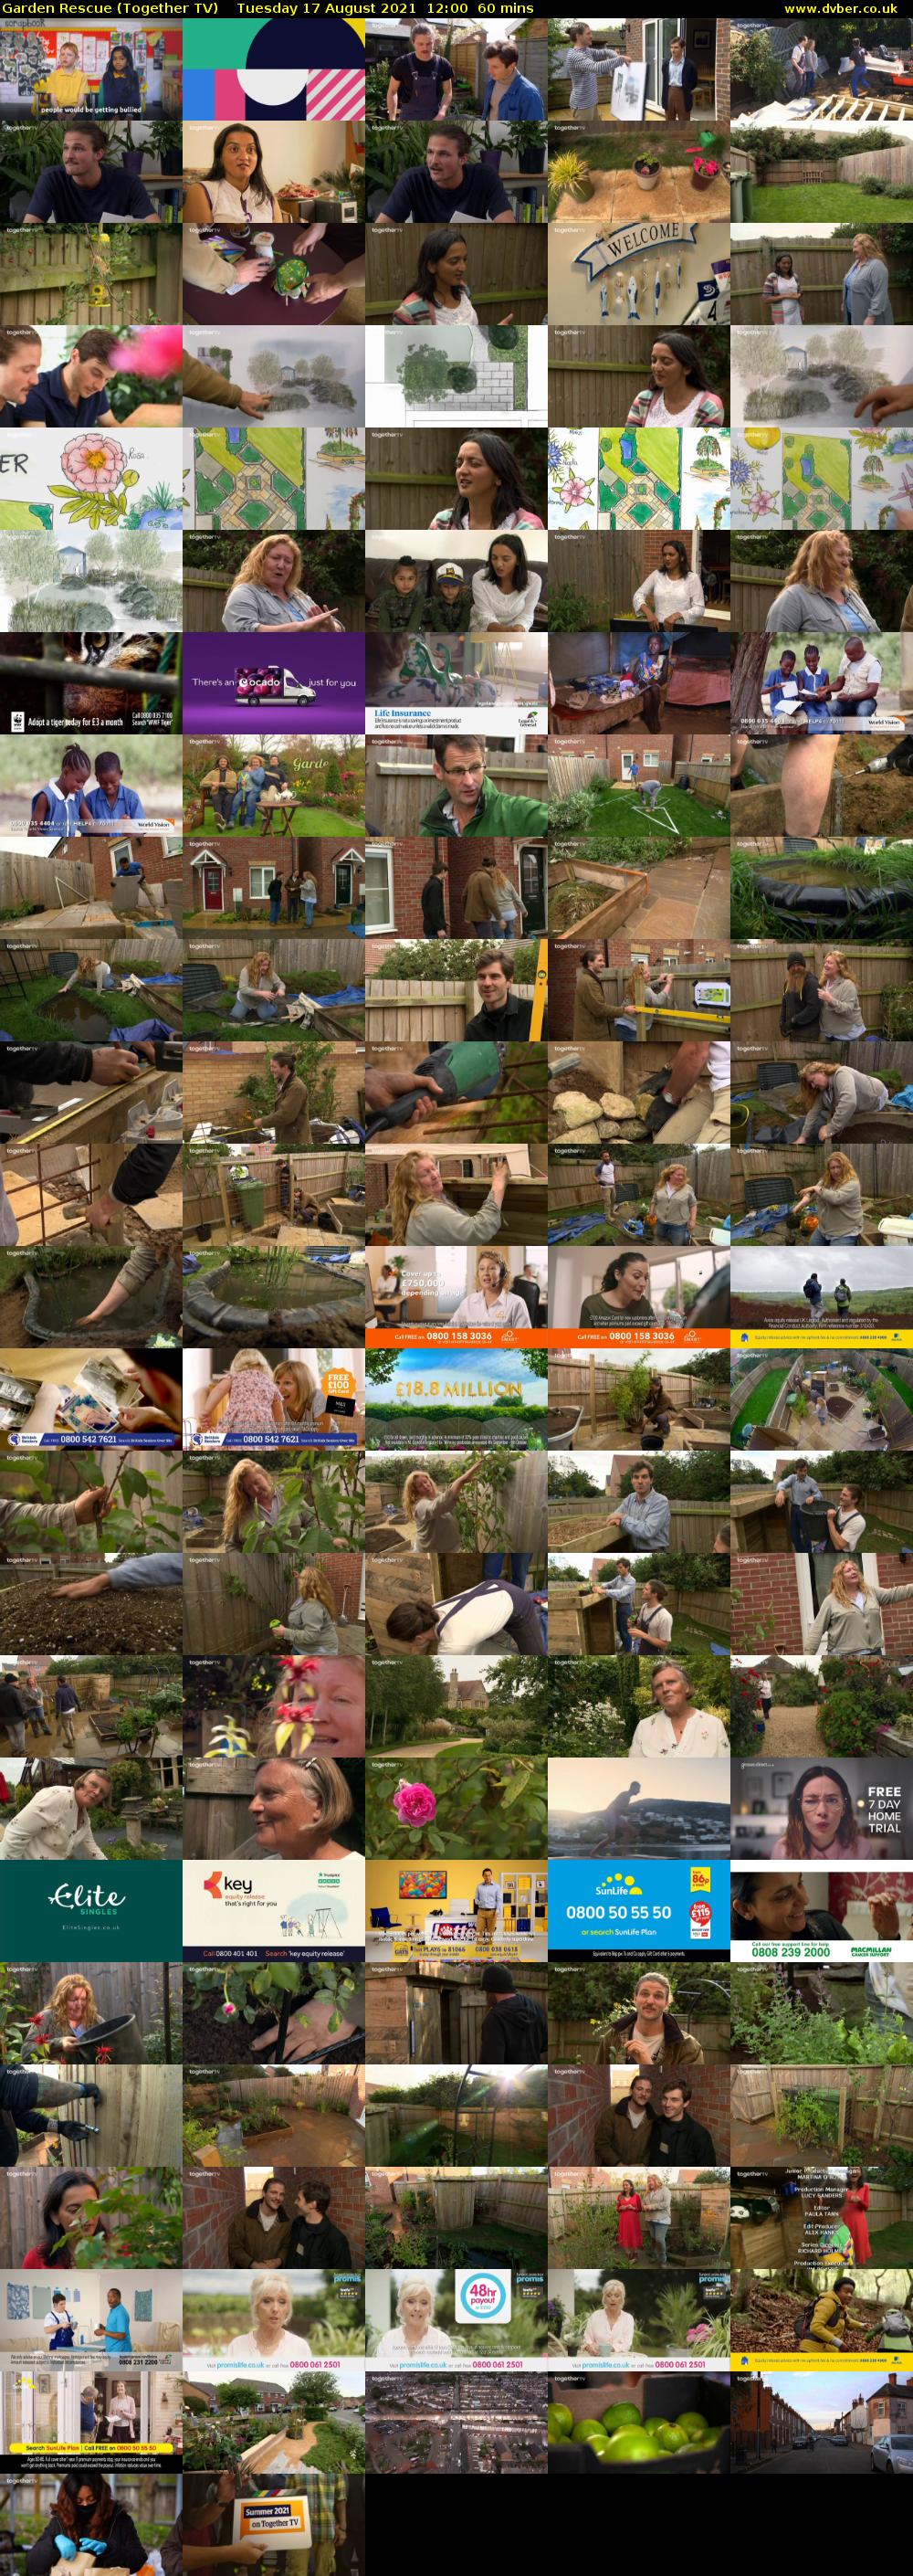 Garden Rescue (Together TV) Tuesday 17 August 2021 12:00 - 13:00